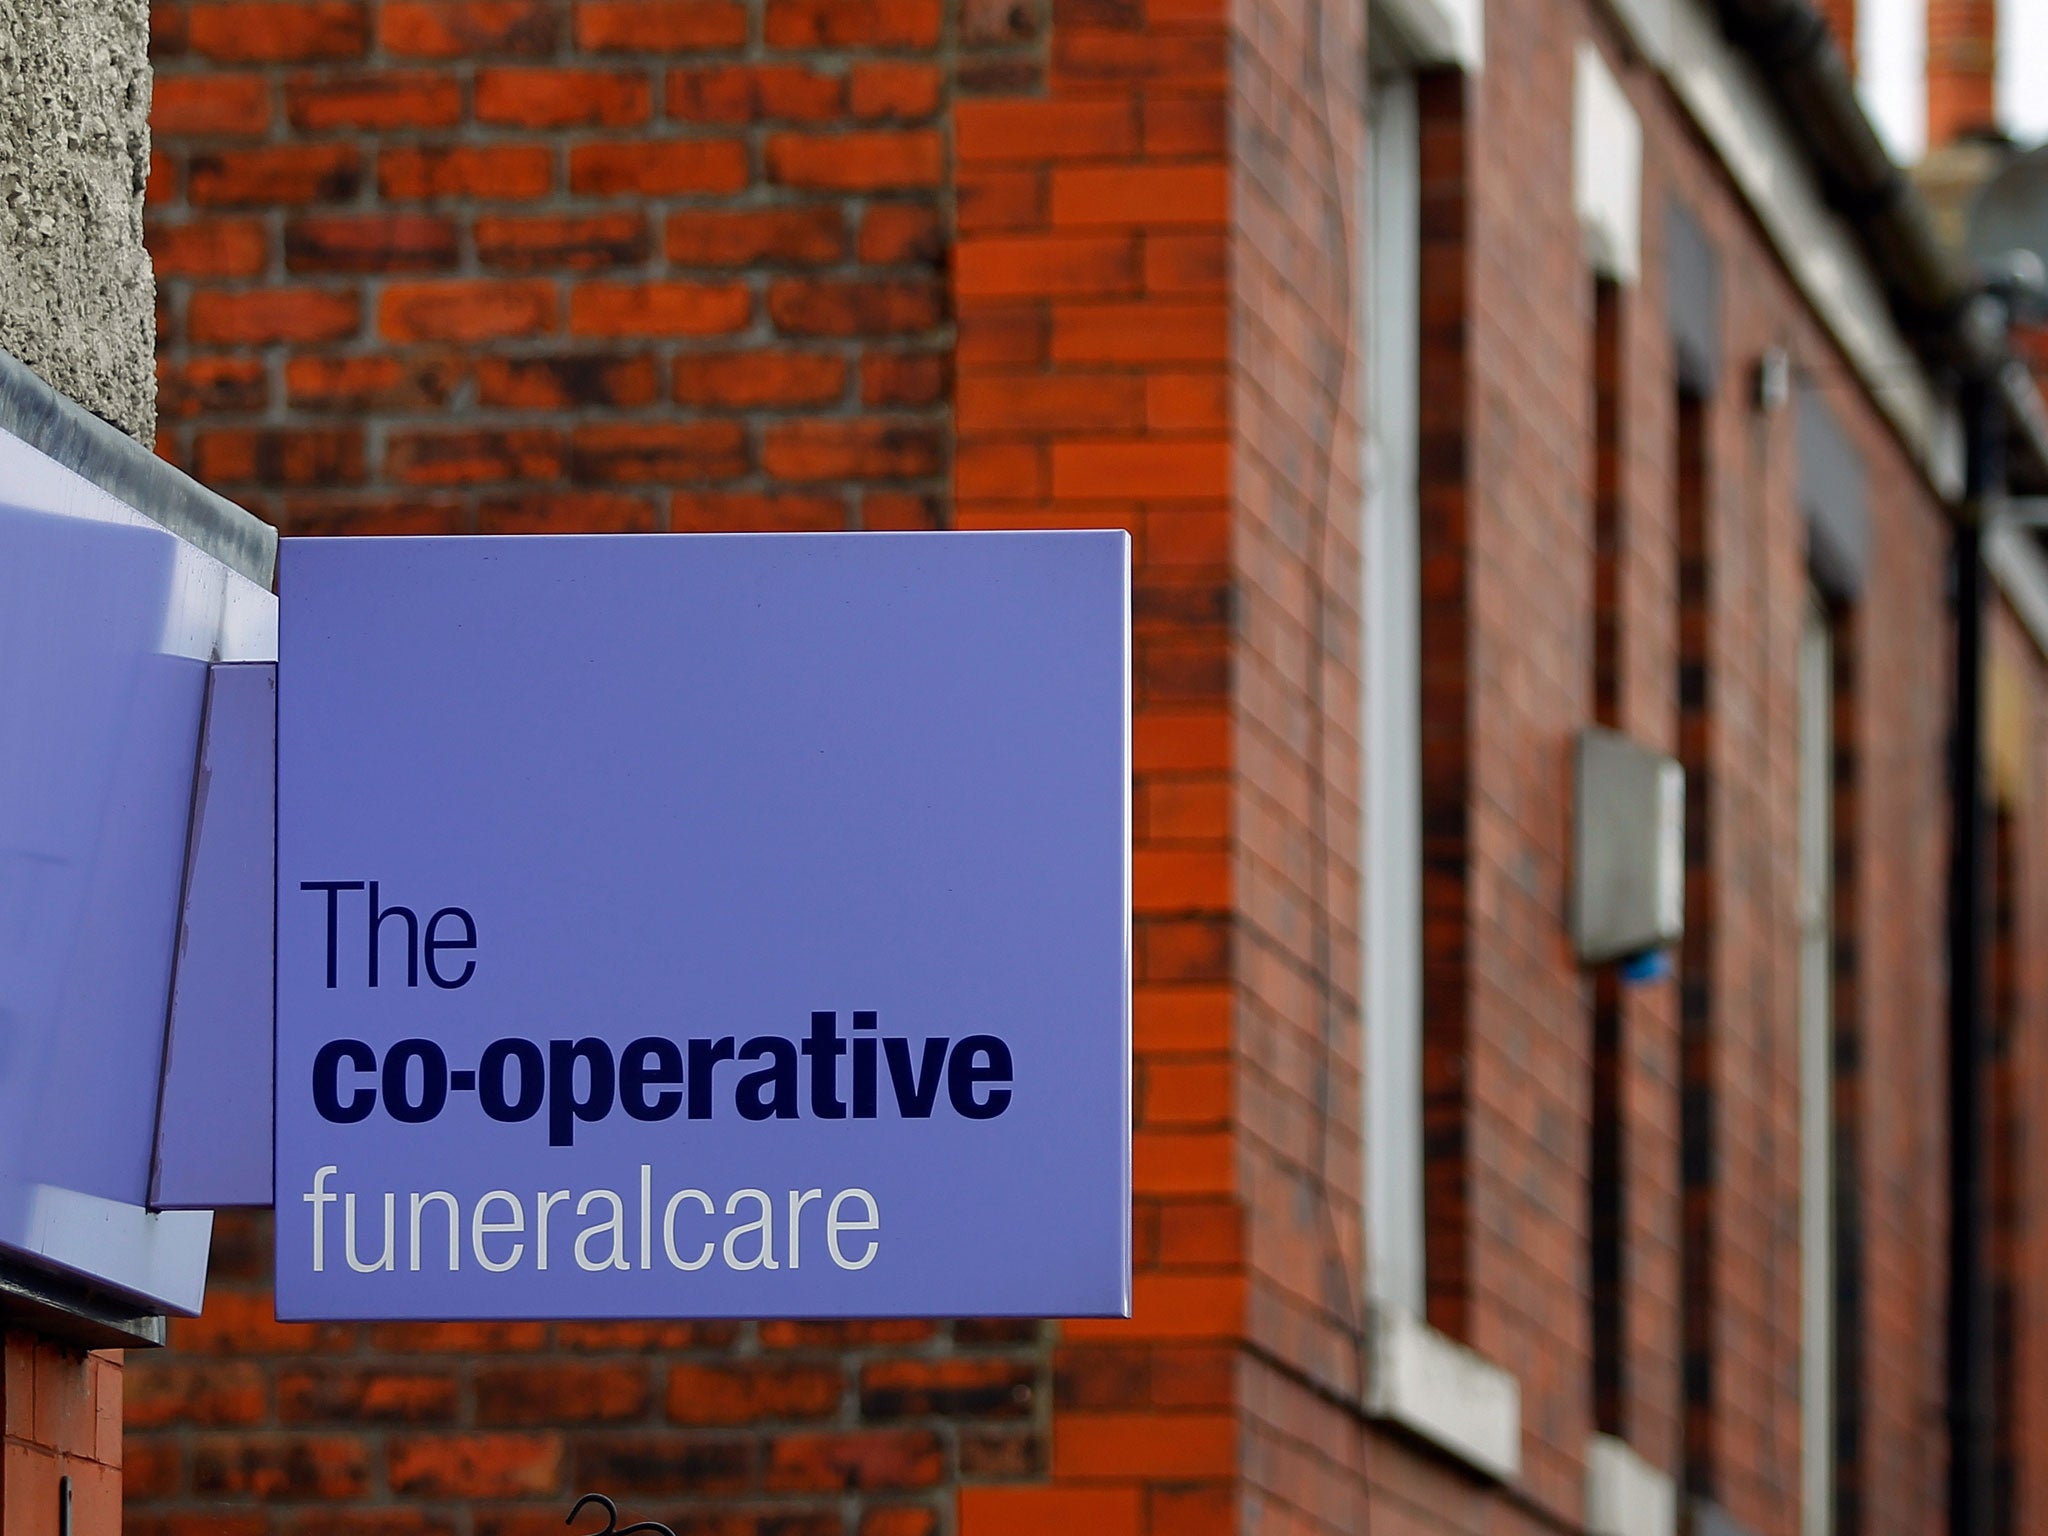 The Co-operative Group is selling its crematoria to funeral services group Dignity and will plough the proceeds into improving its funeral homes business.